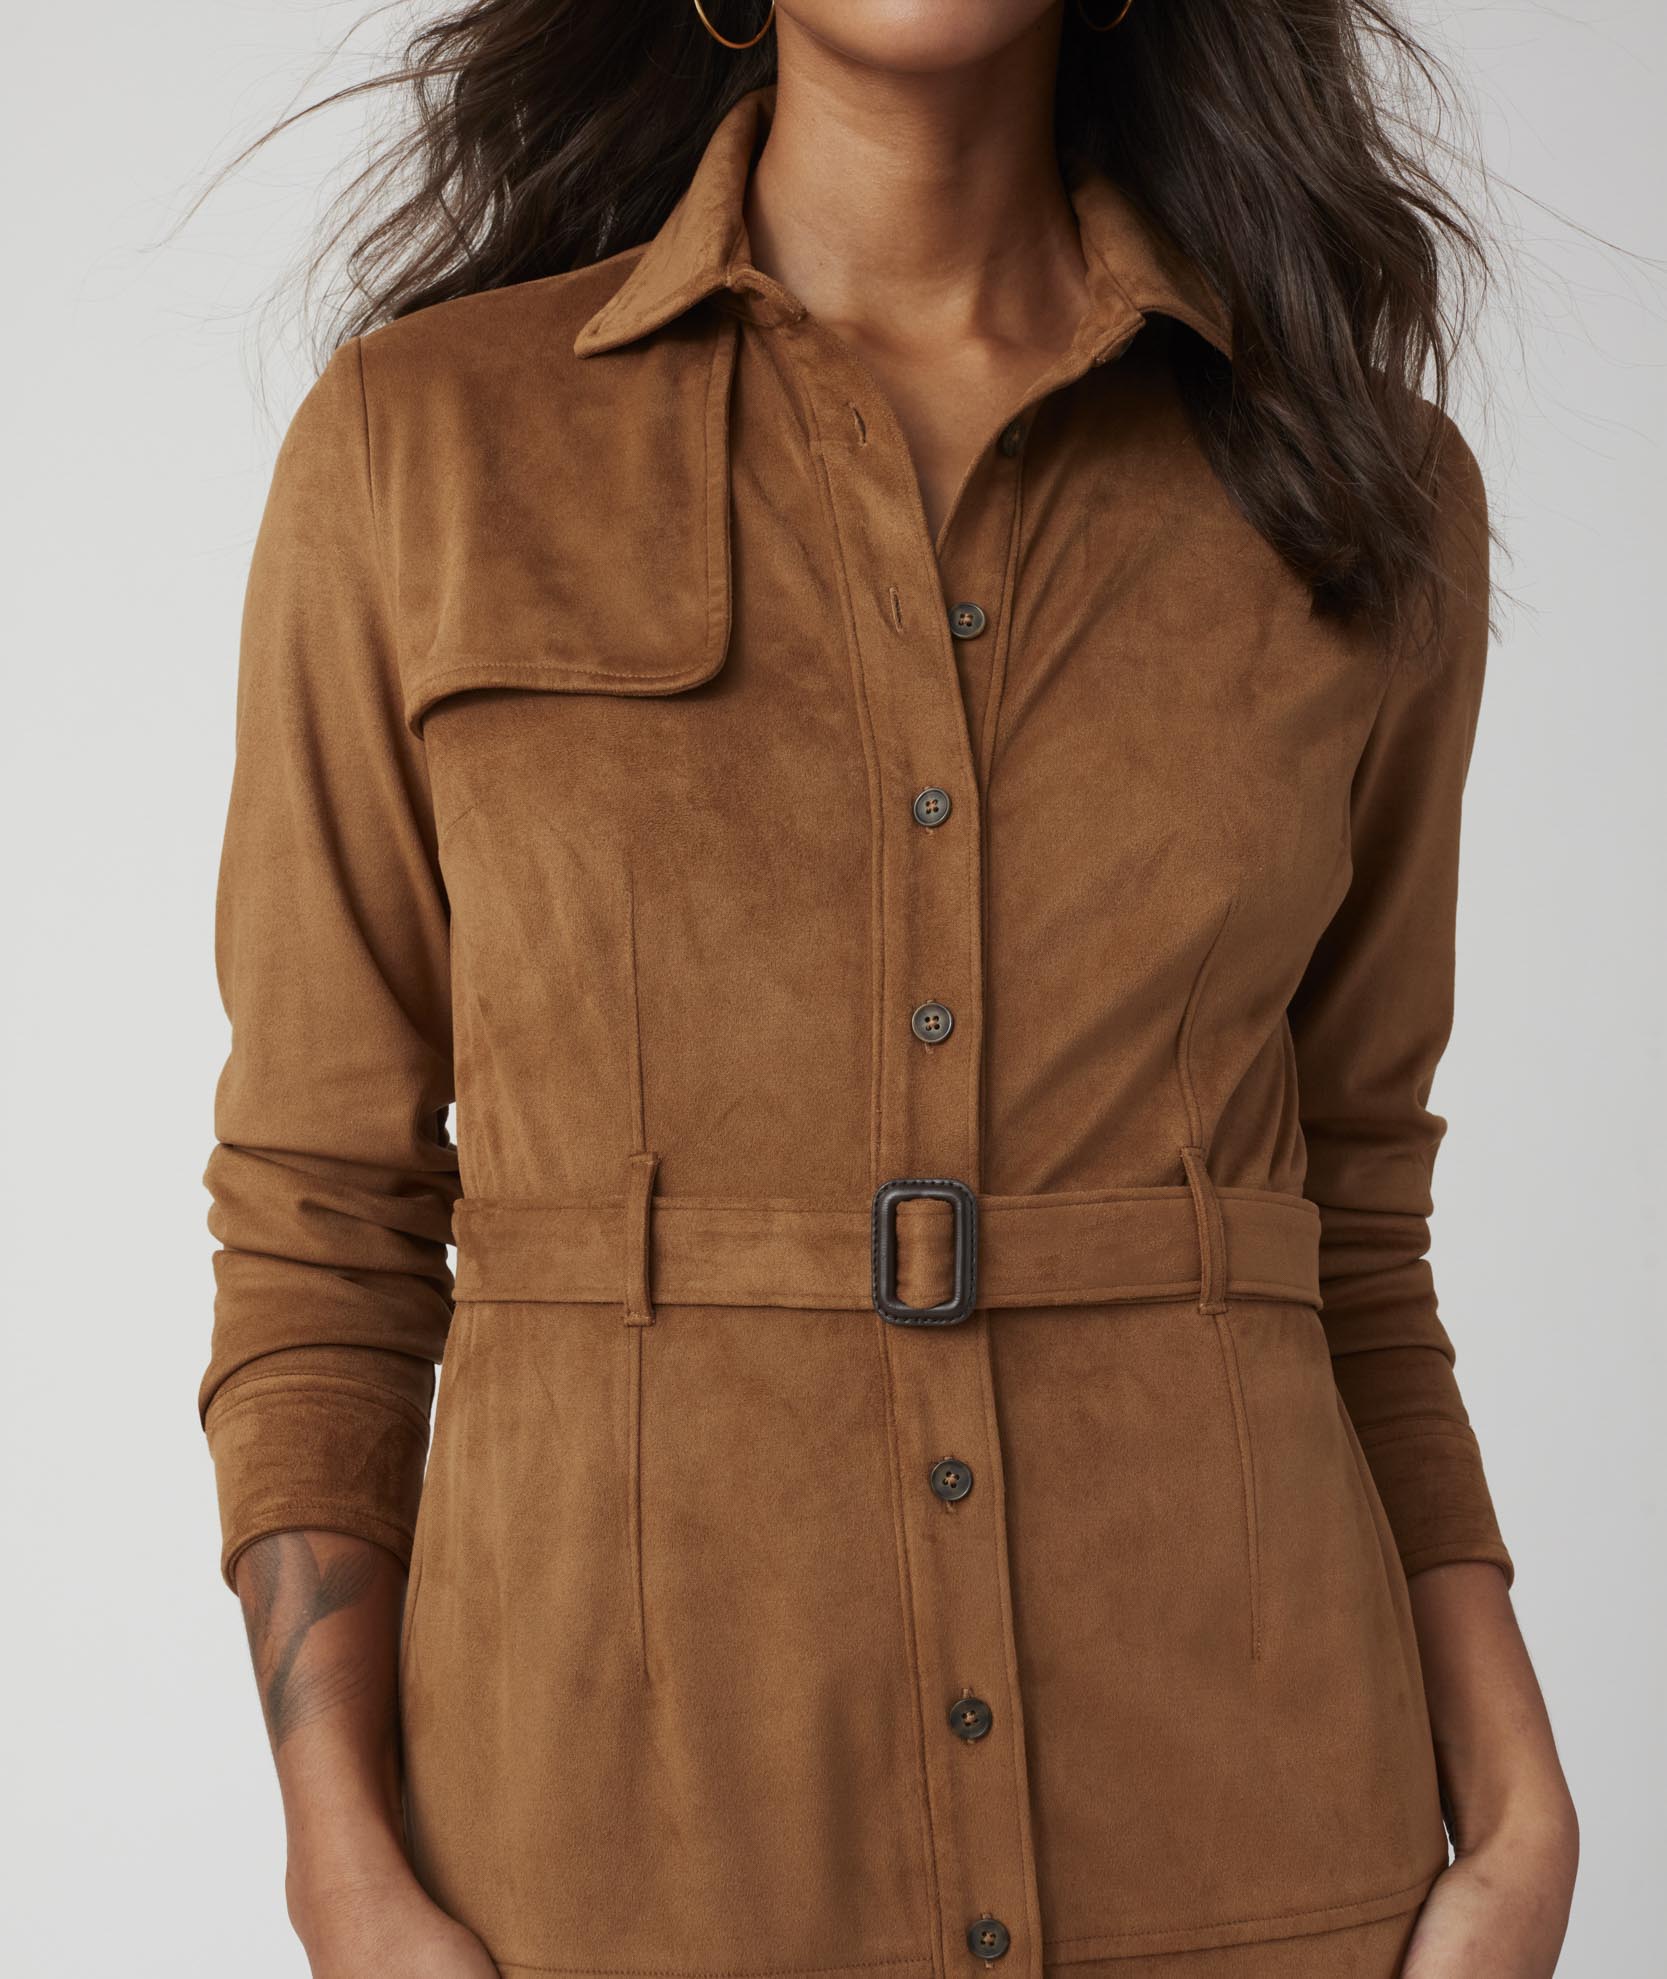 Faux Suede Belted Shirtdress Solid Brown | UNTUCKit